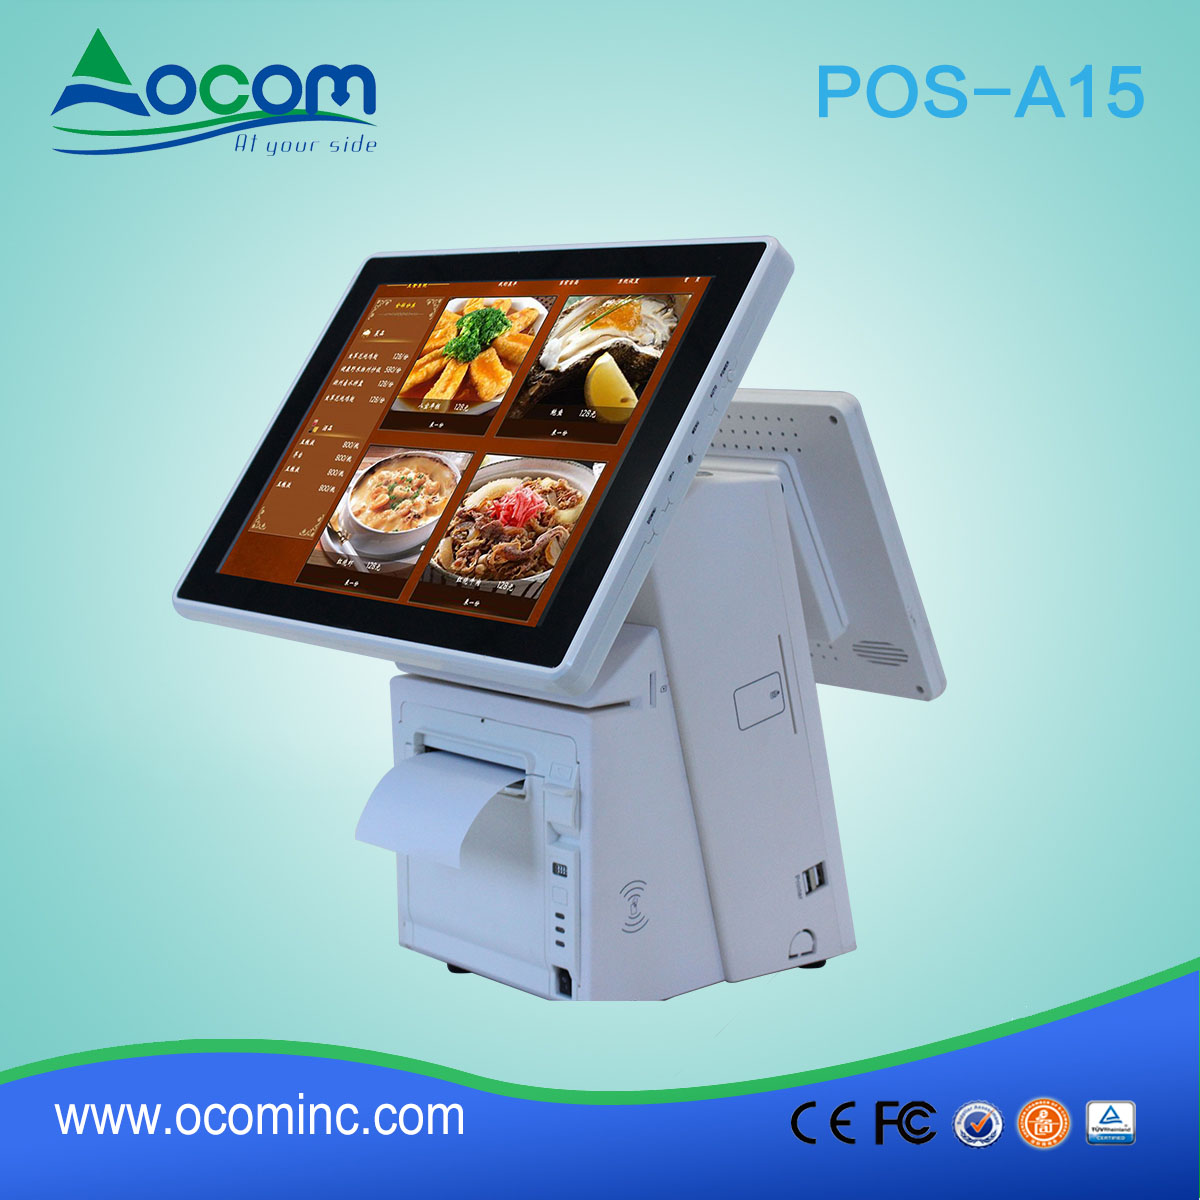 POS-A15 pos all in one Pos terminal with secondary screen optional